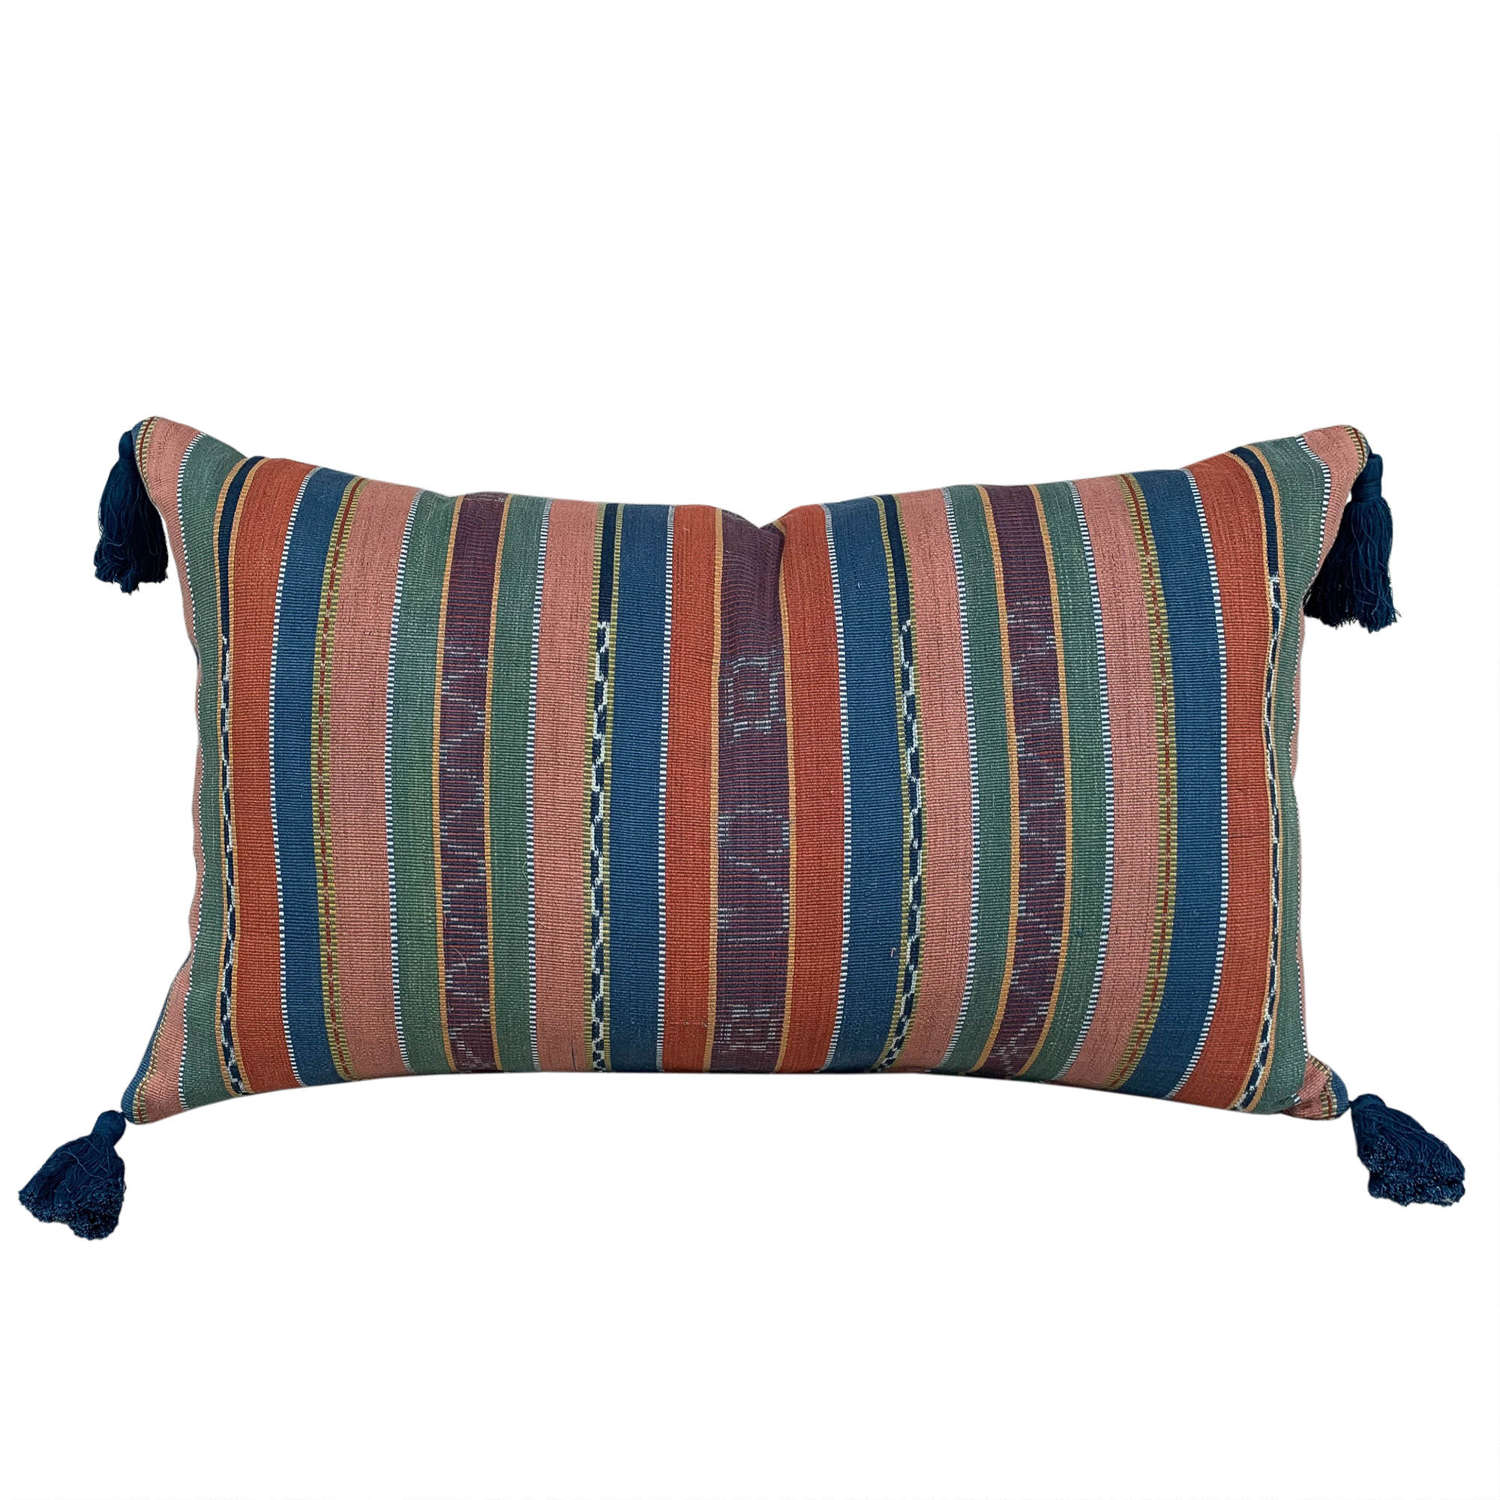 Larges Flores Sikka cushion